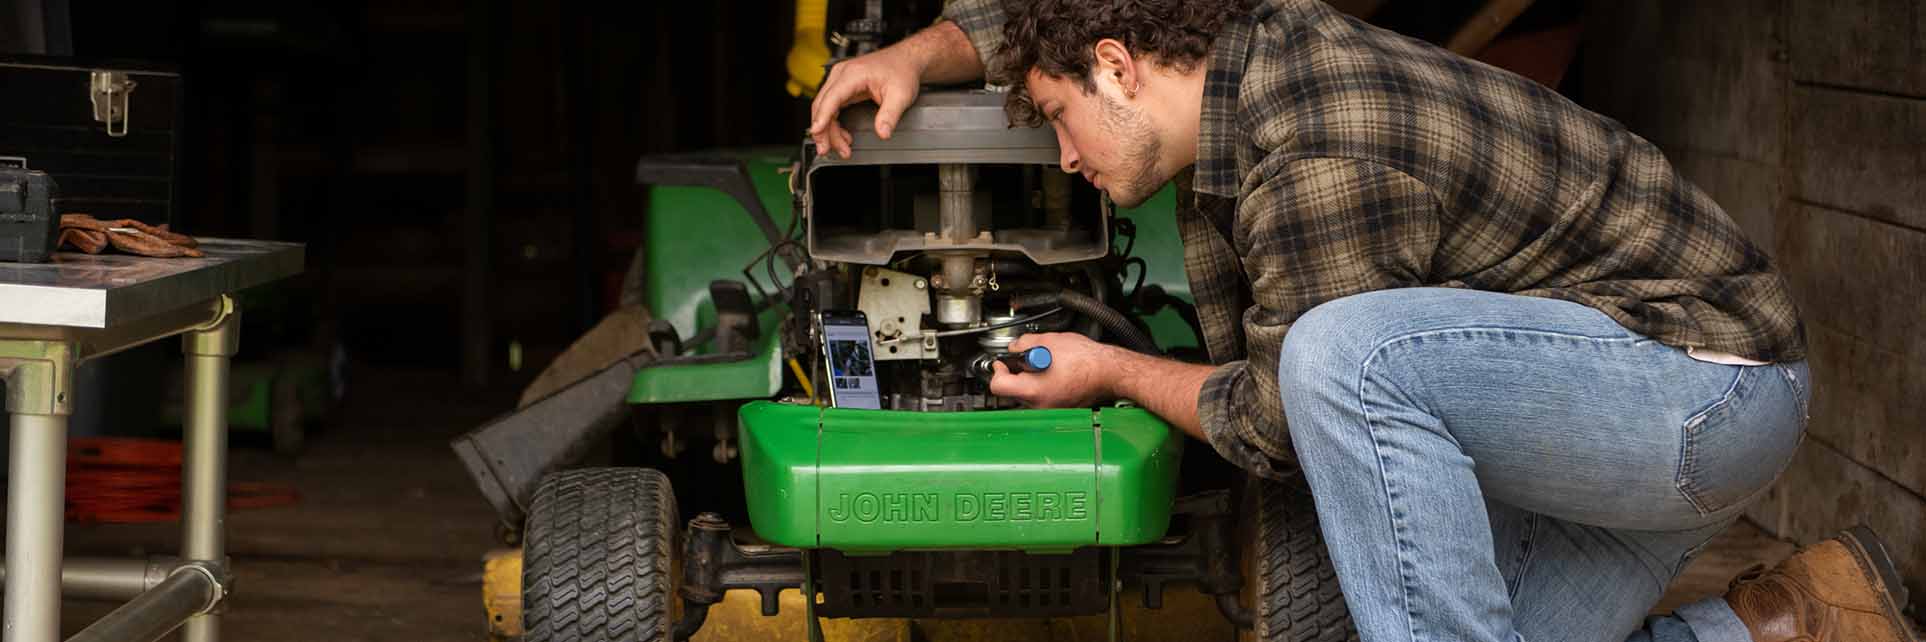 Deere Promised Farmers the Right to Repair. Can We Trust Them?